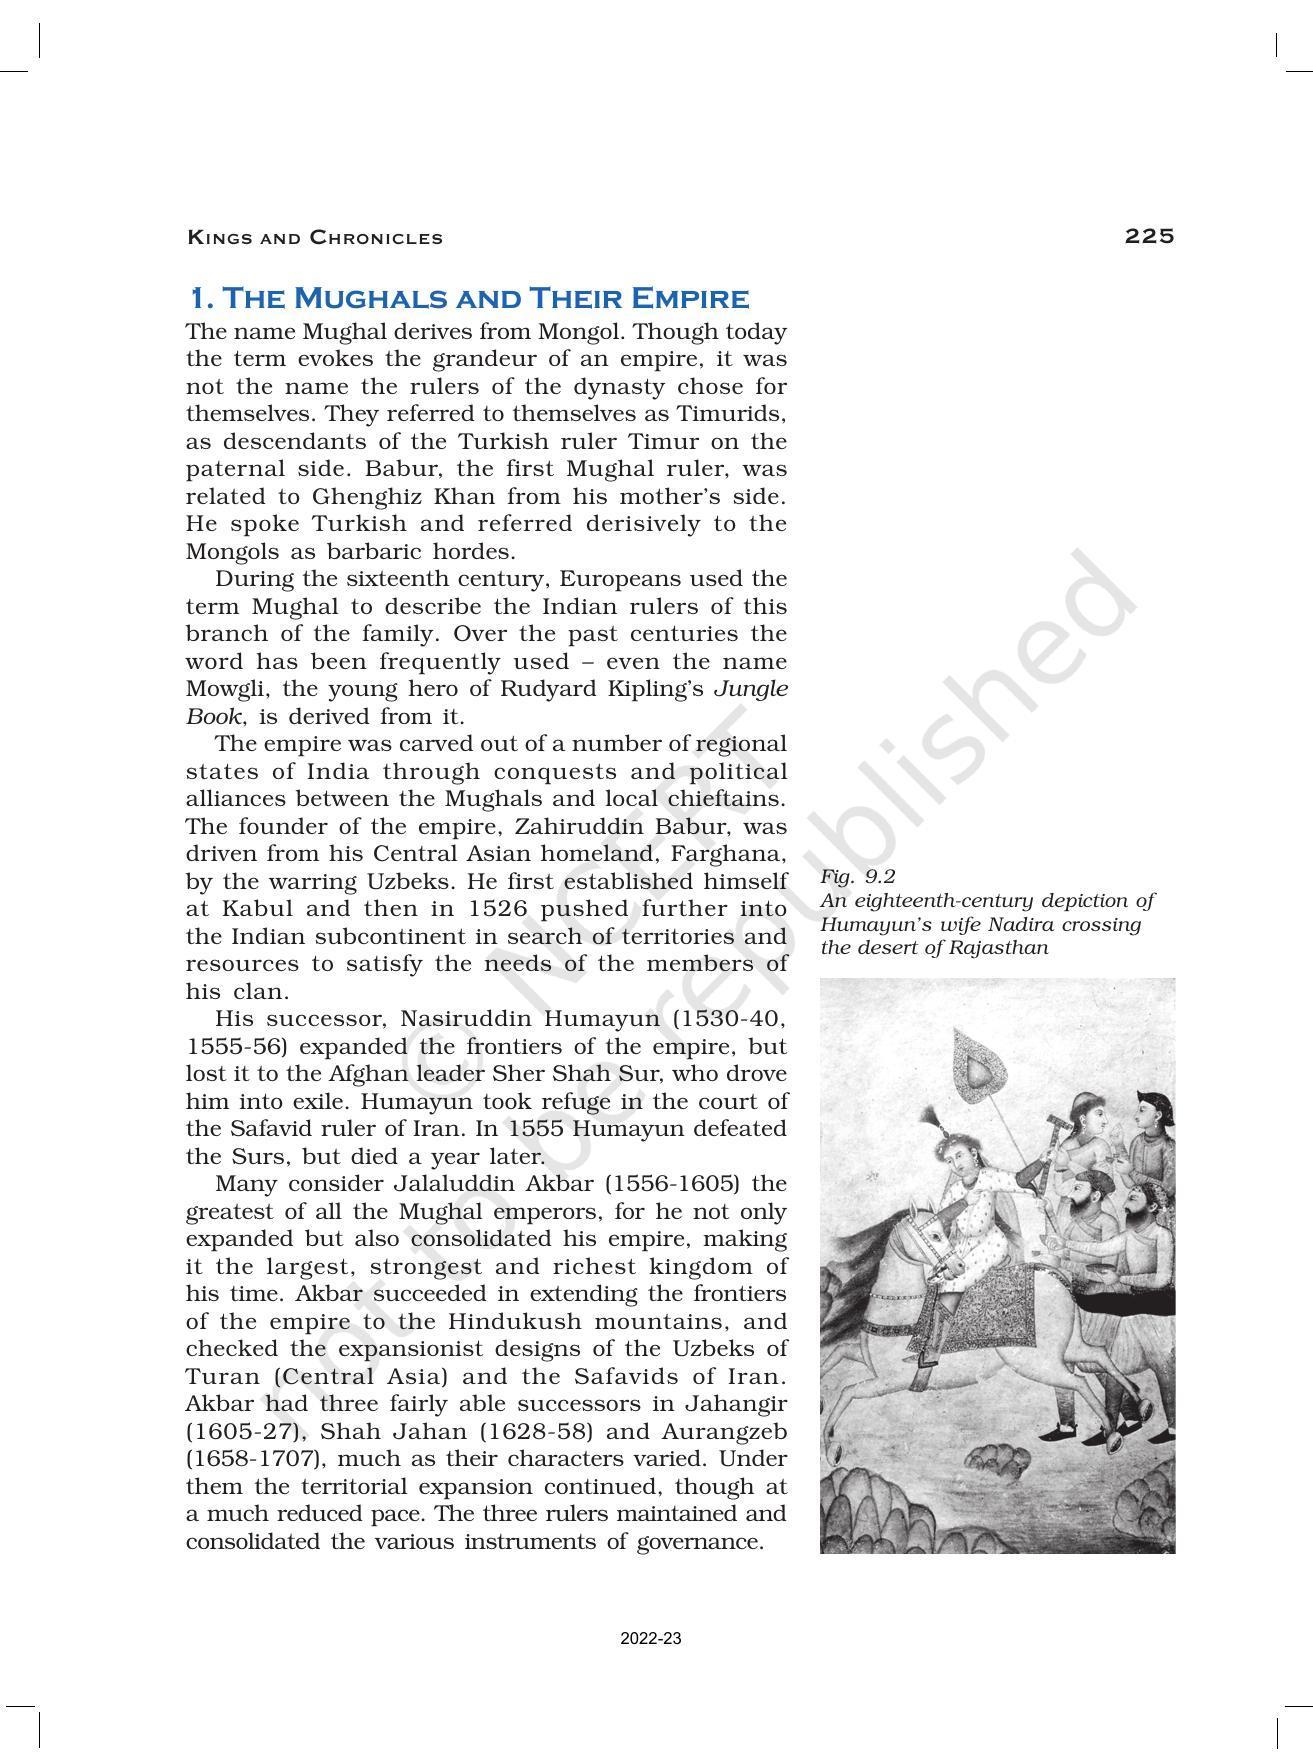 NCERT Book for Class 12 History (Part-II) Chapter 9 Kings and Chronicles - Page 2